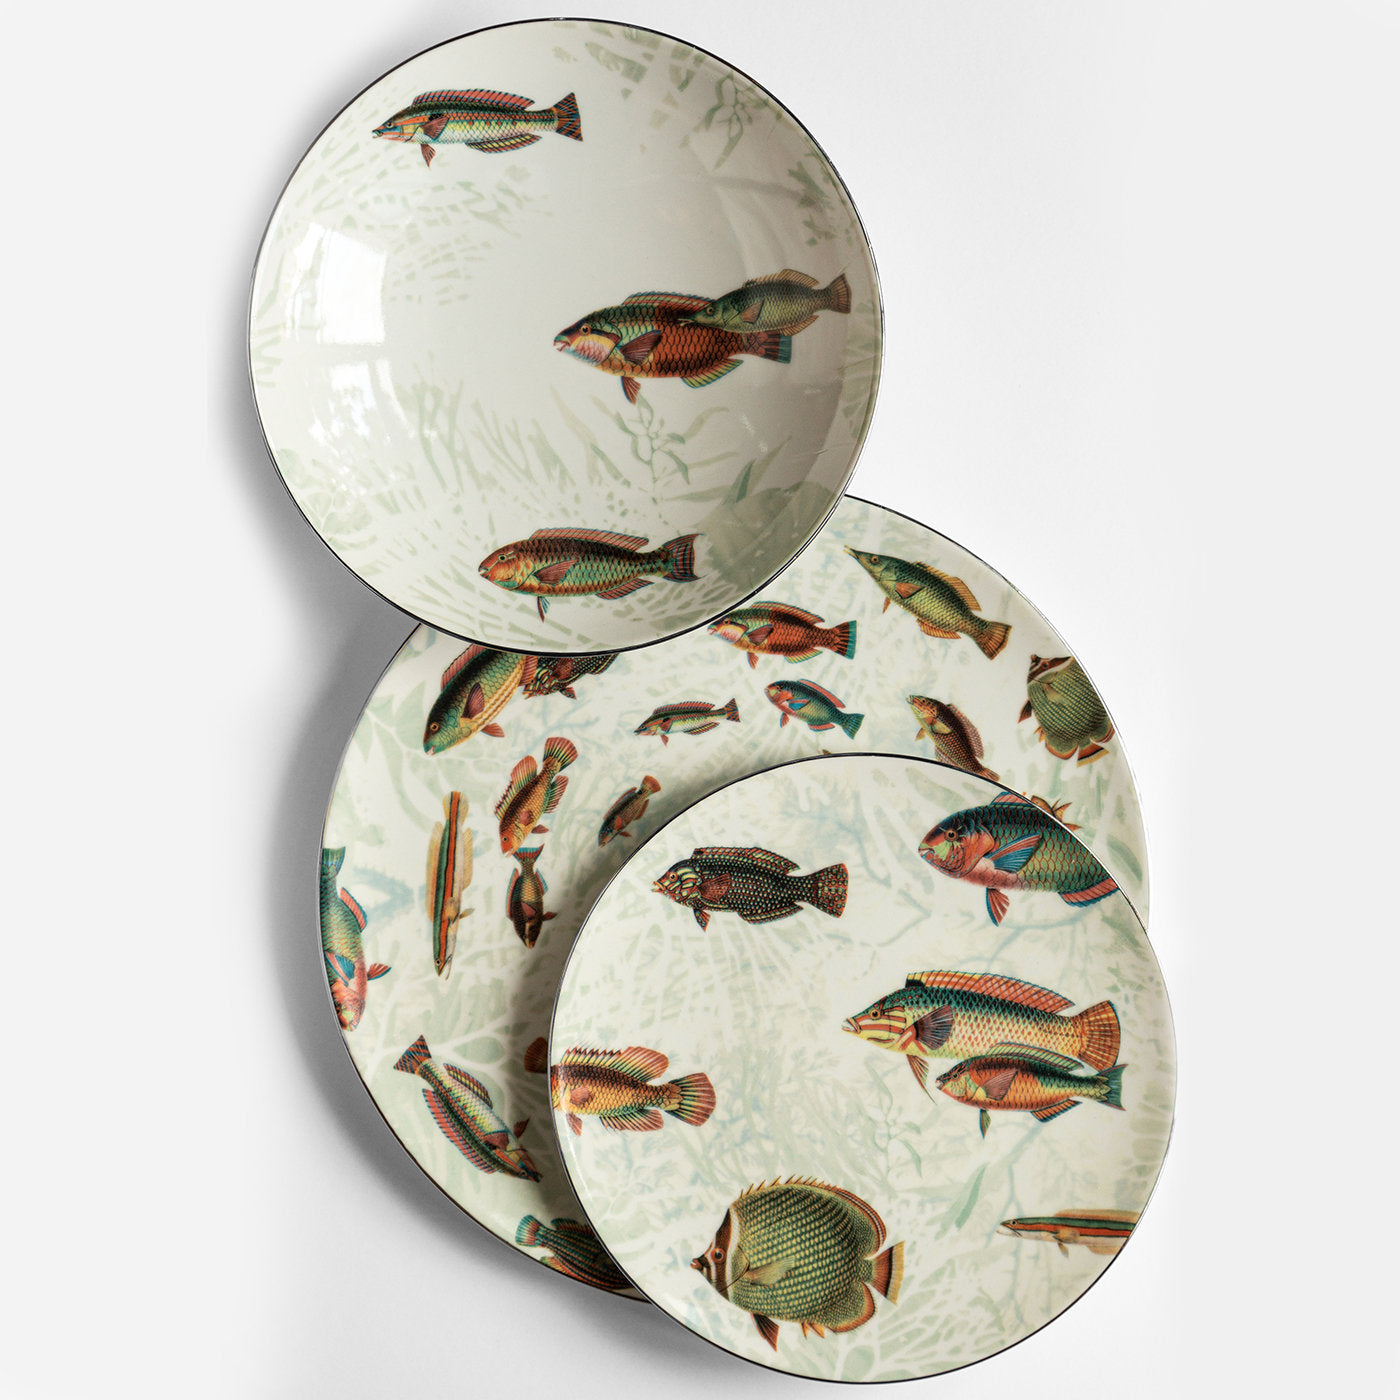 Amami Set Of 2 Porcelain Dessert Plates With Tropical Fish #3 - Alternative view 1